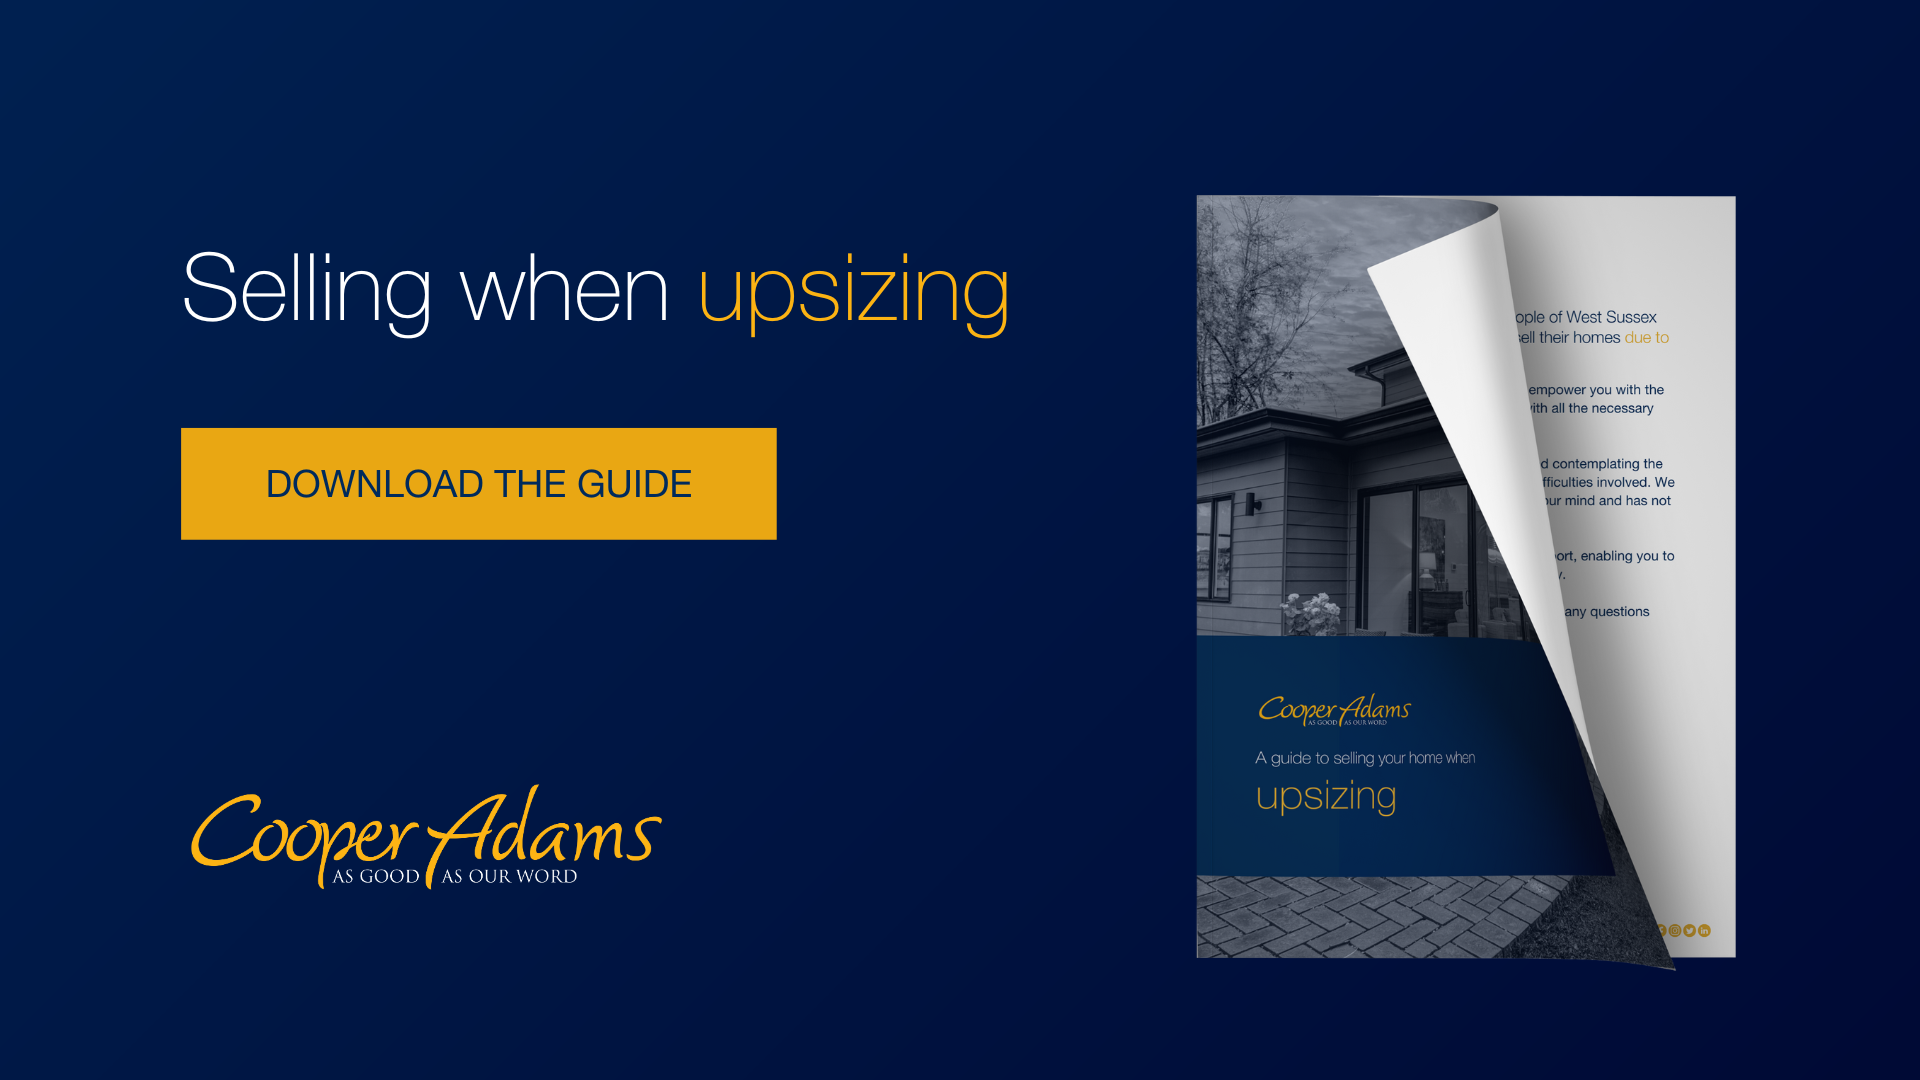 Download our guide to selling your home to upsize